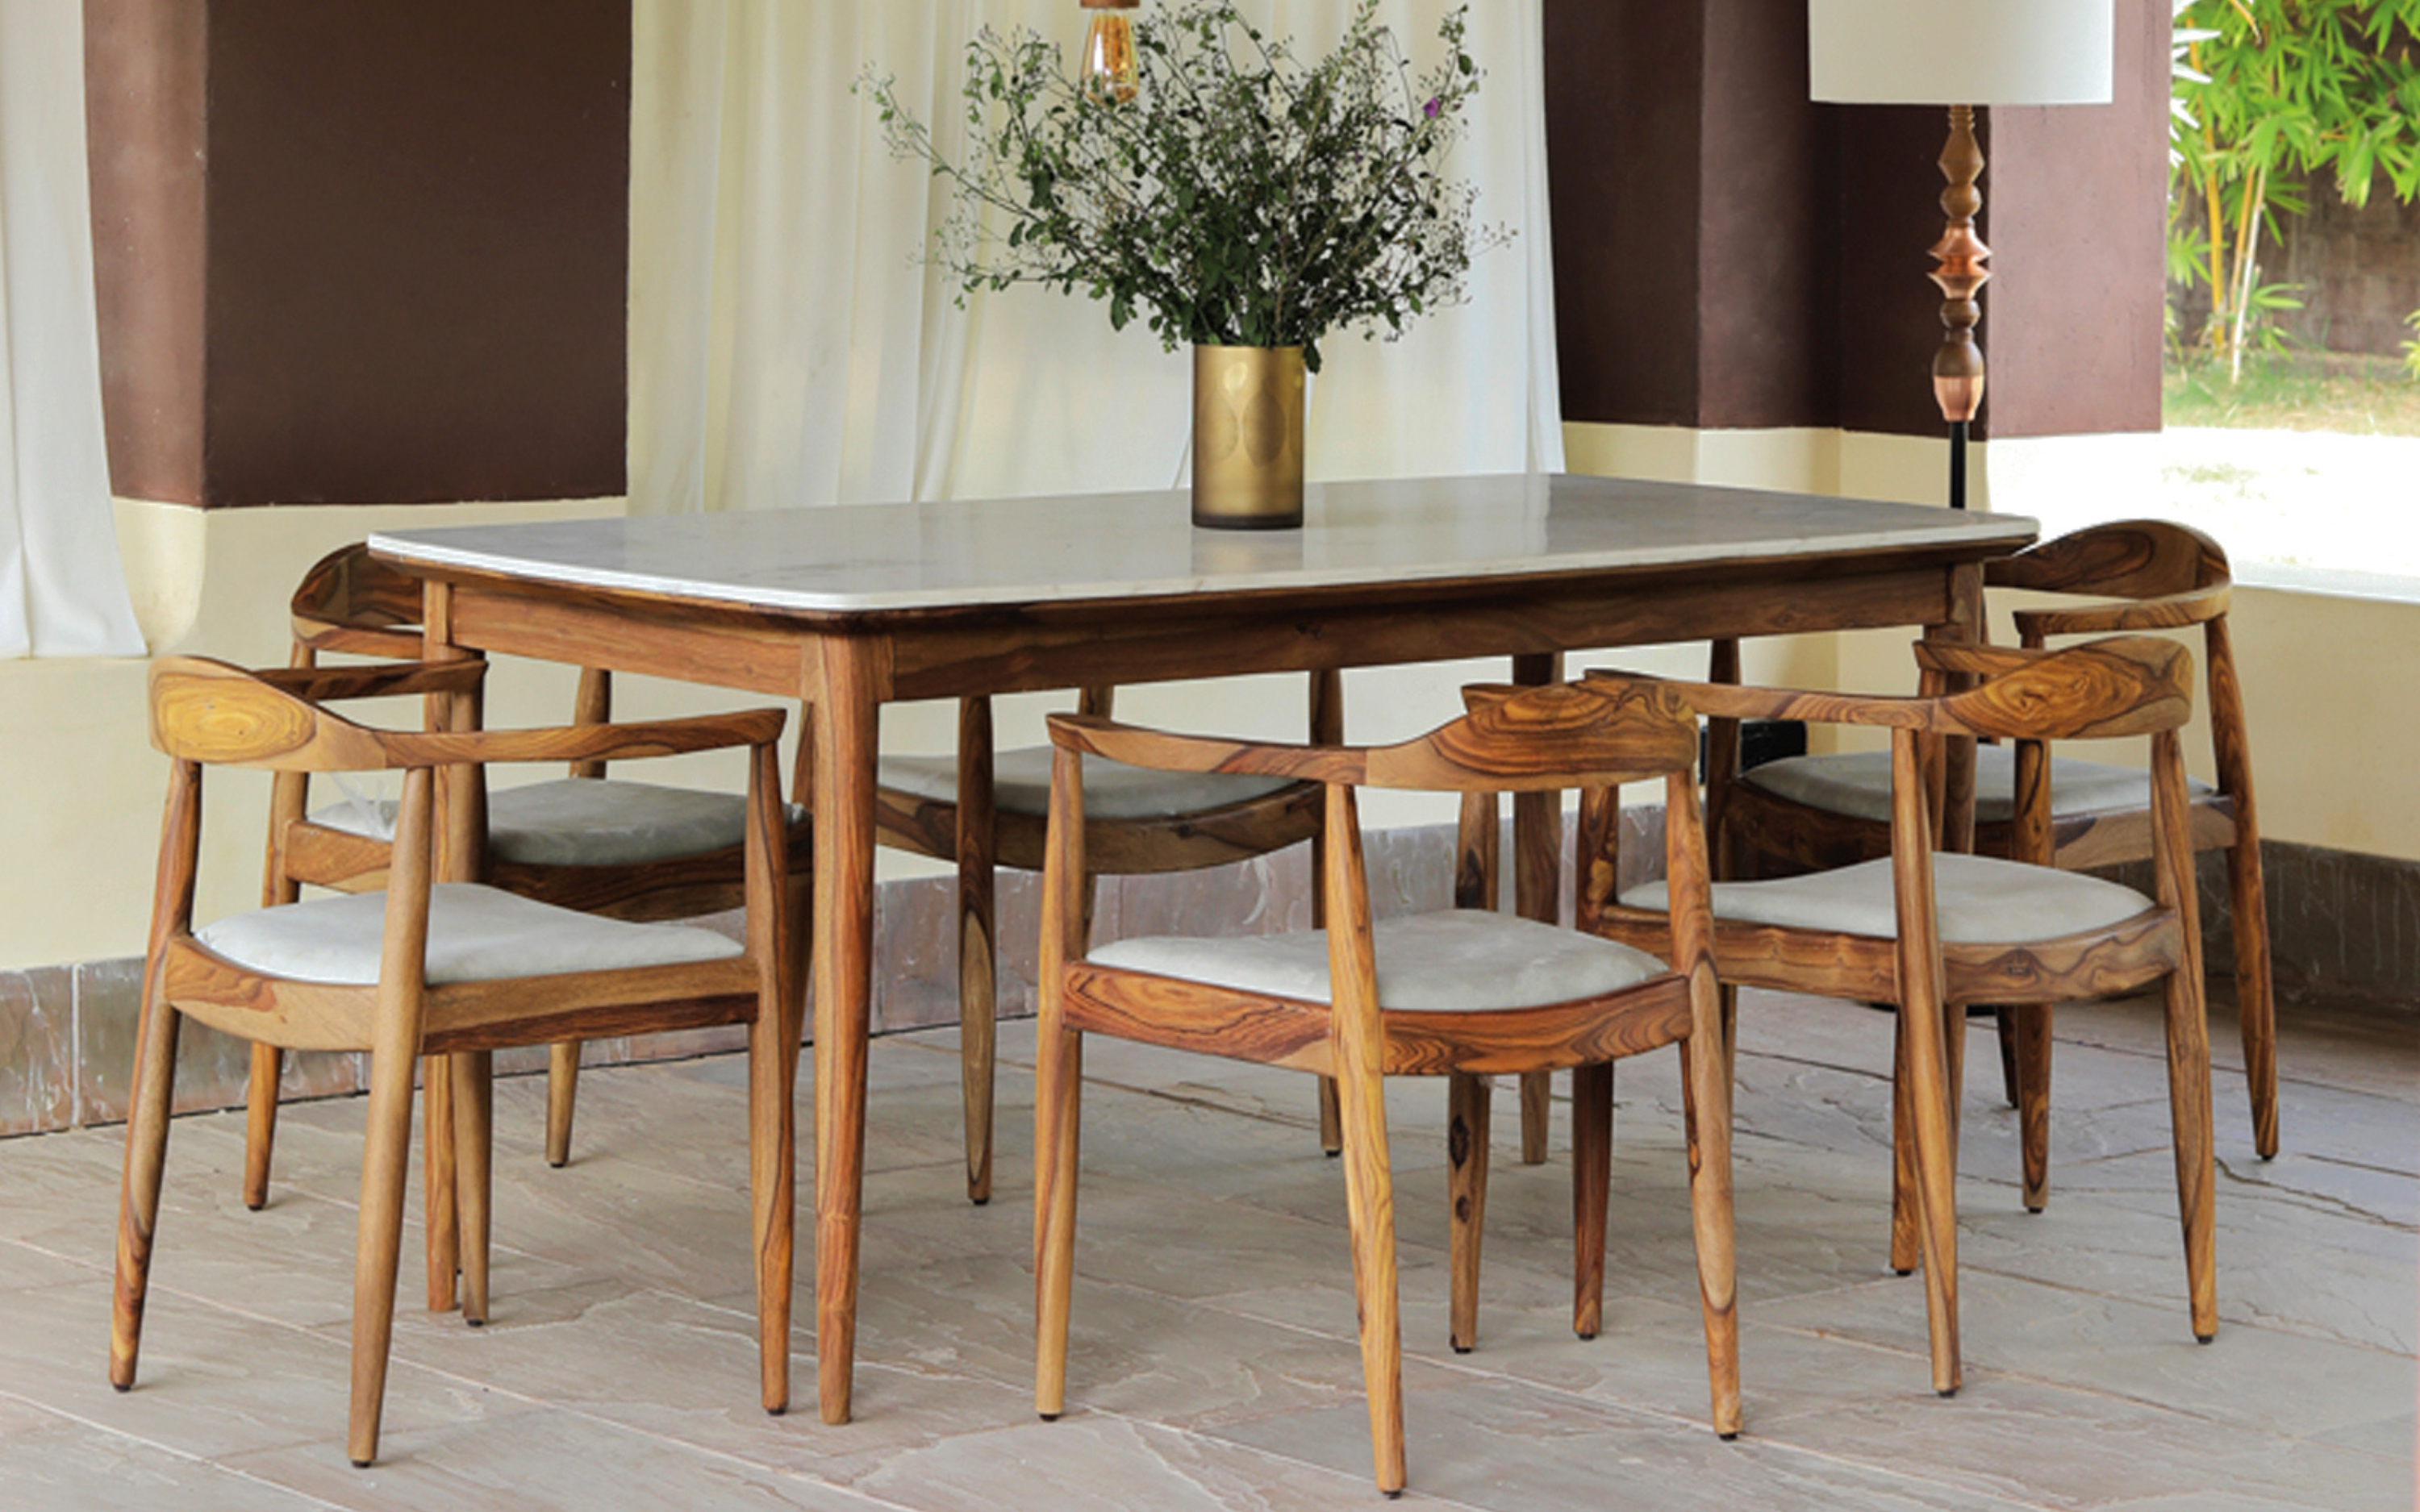 Dado Dining Table With 6 Chairs